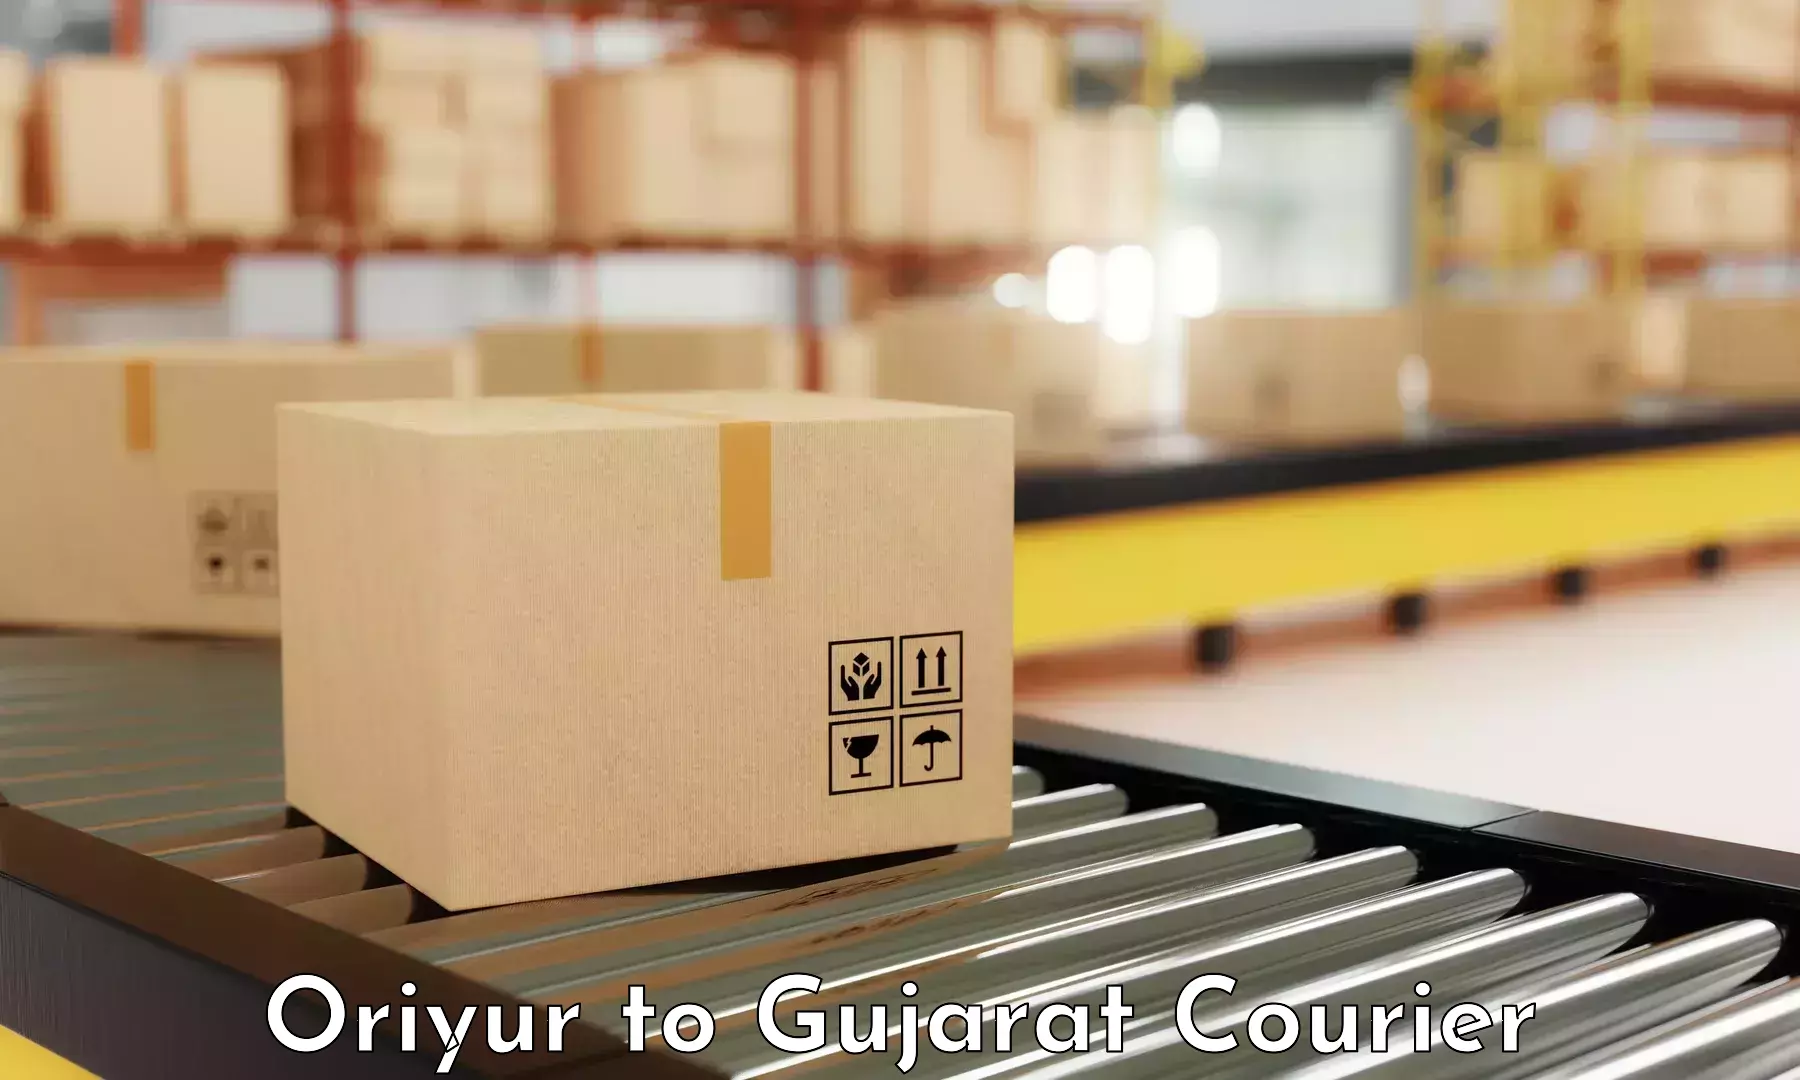 Delivery service partnership Oriyur to Patan